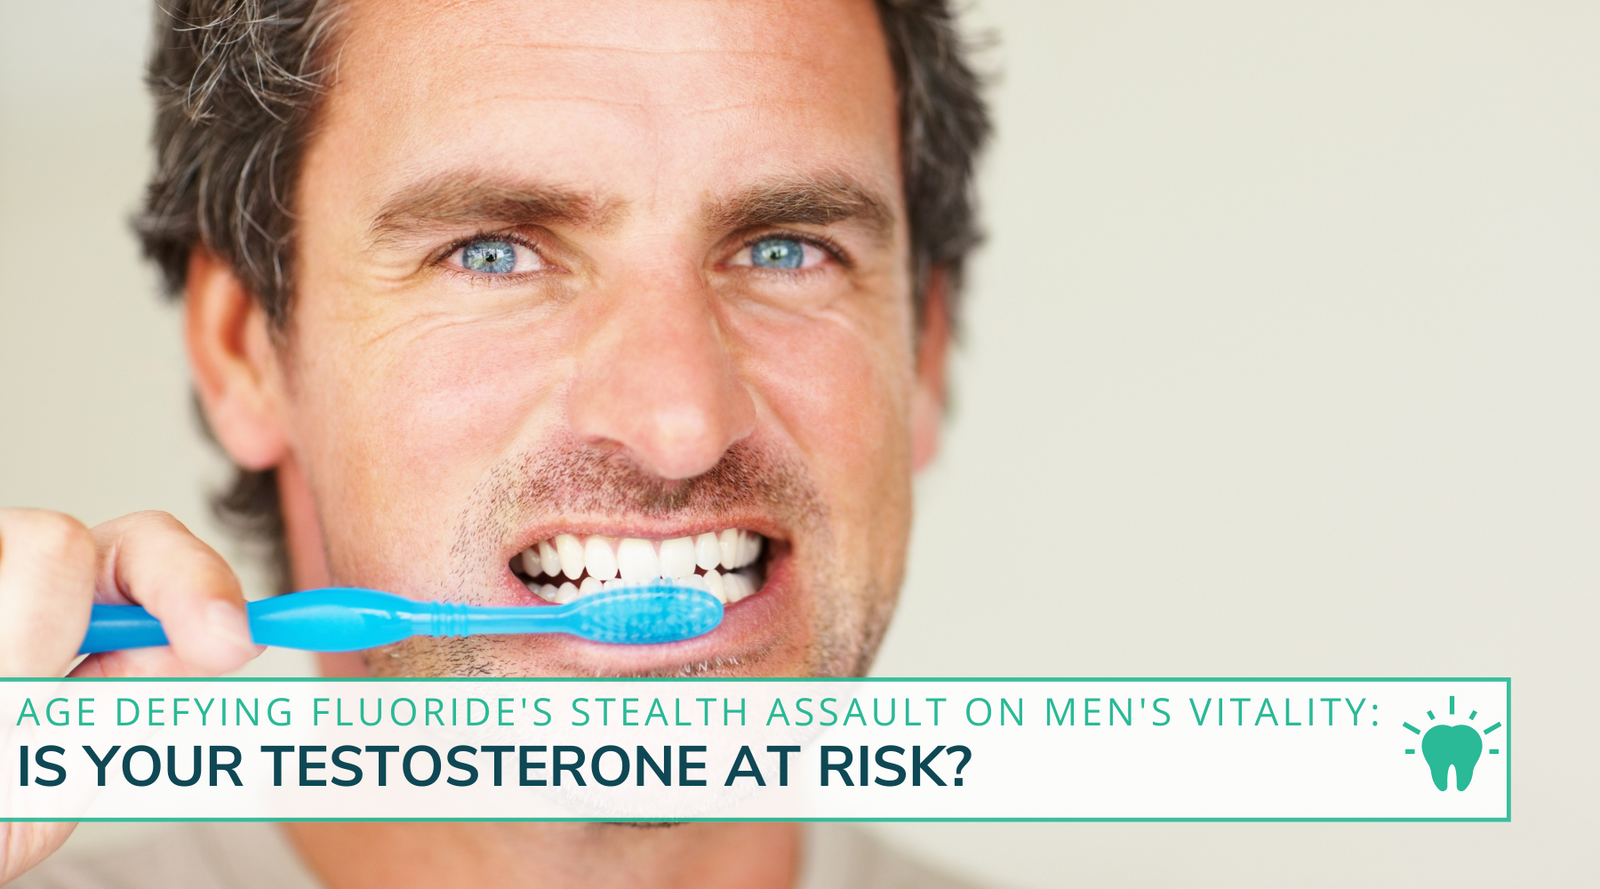 Fluoride's Stealth Assault on Men's Vitality: Is Your Testosterone at Risk?